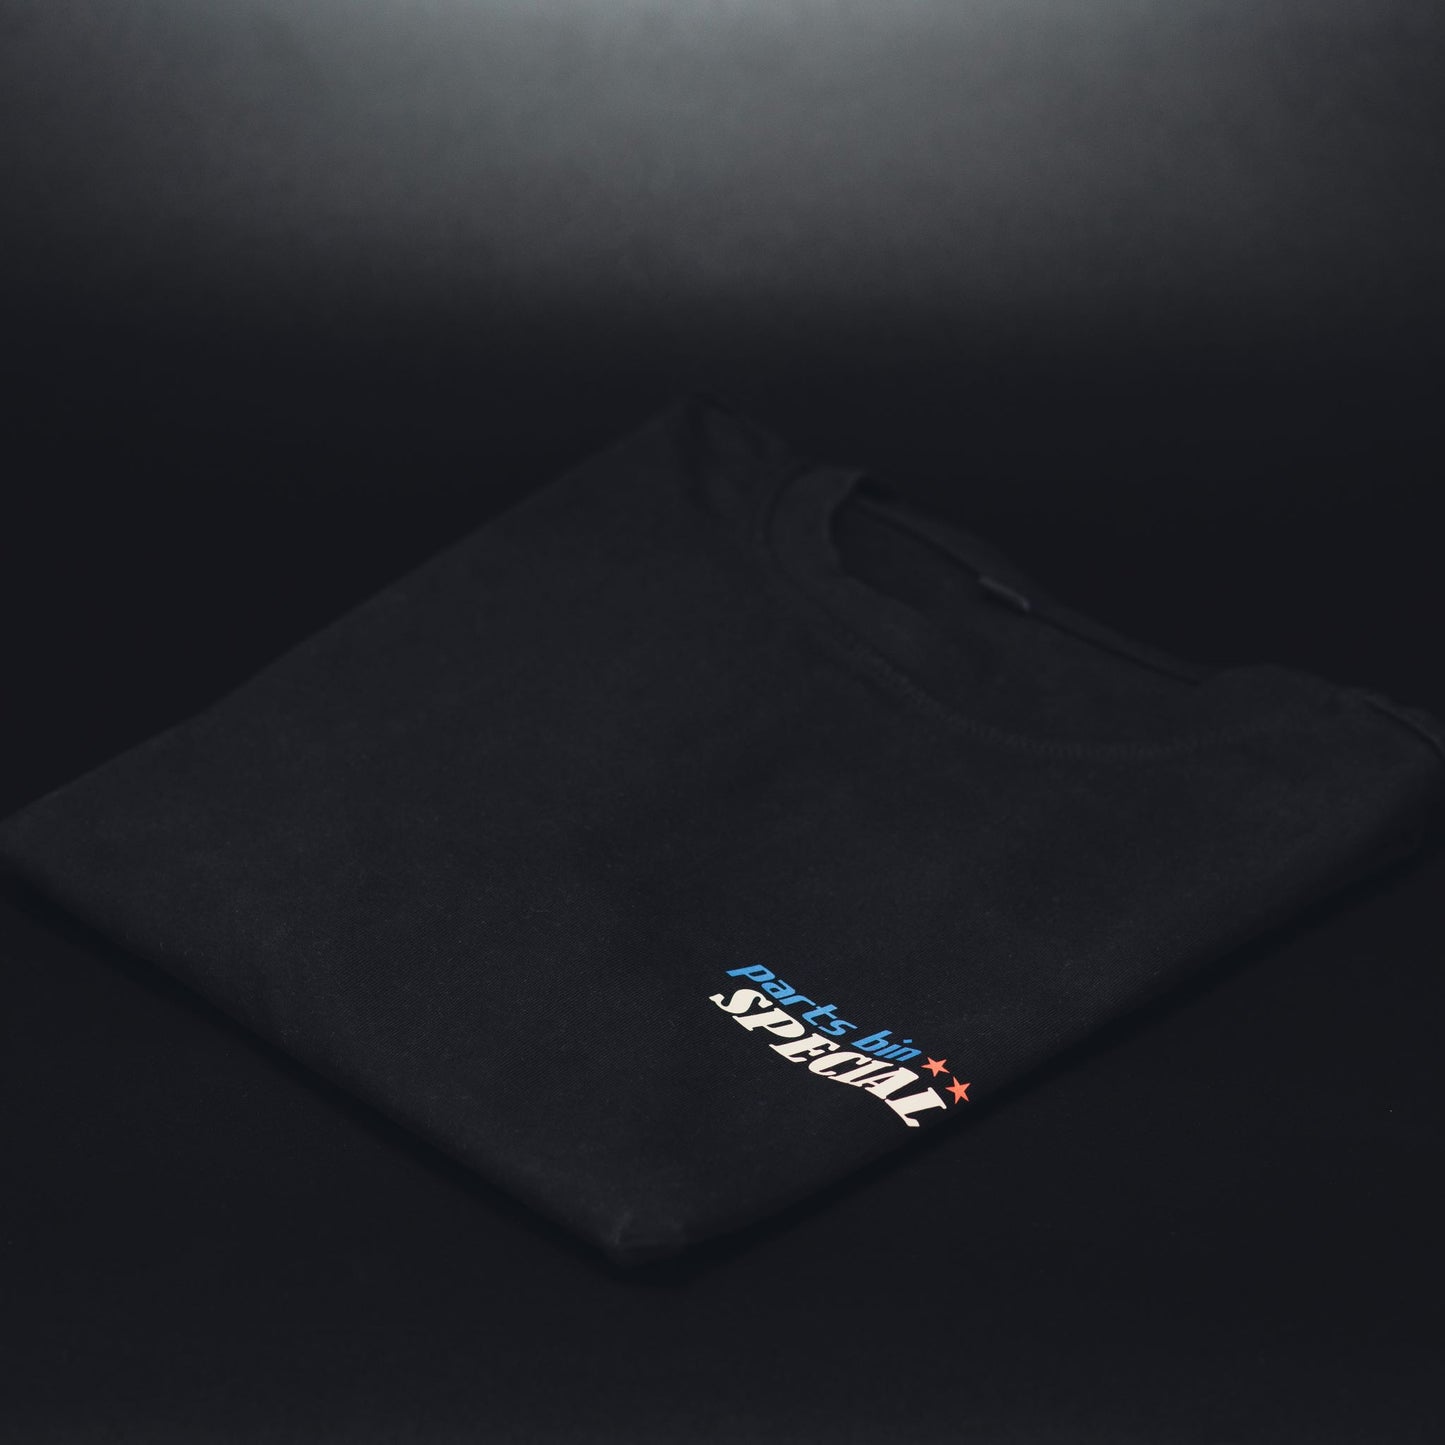 CARSCOPE X SPEED 6 'Parts Bin Special' T-shirt